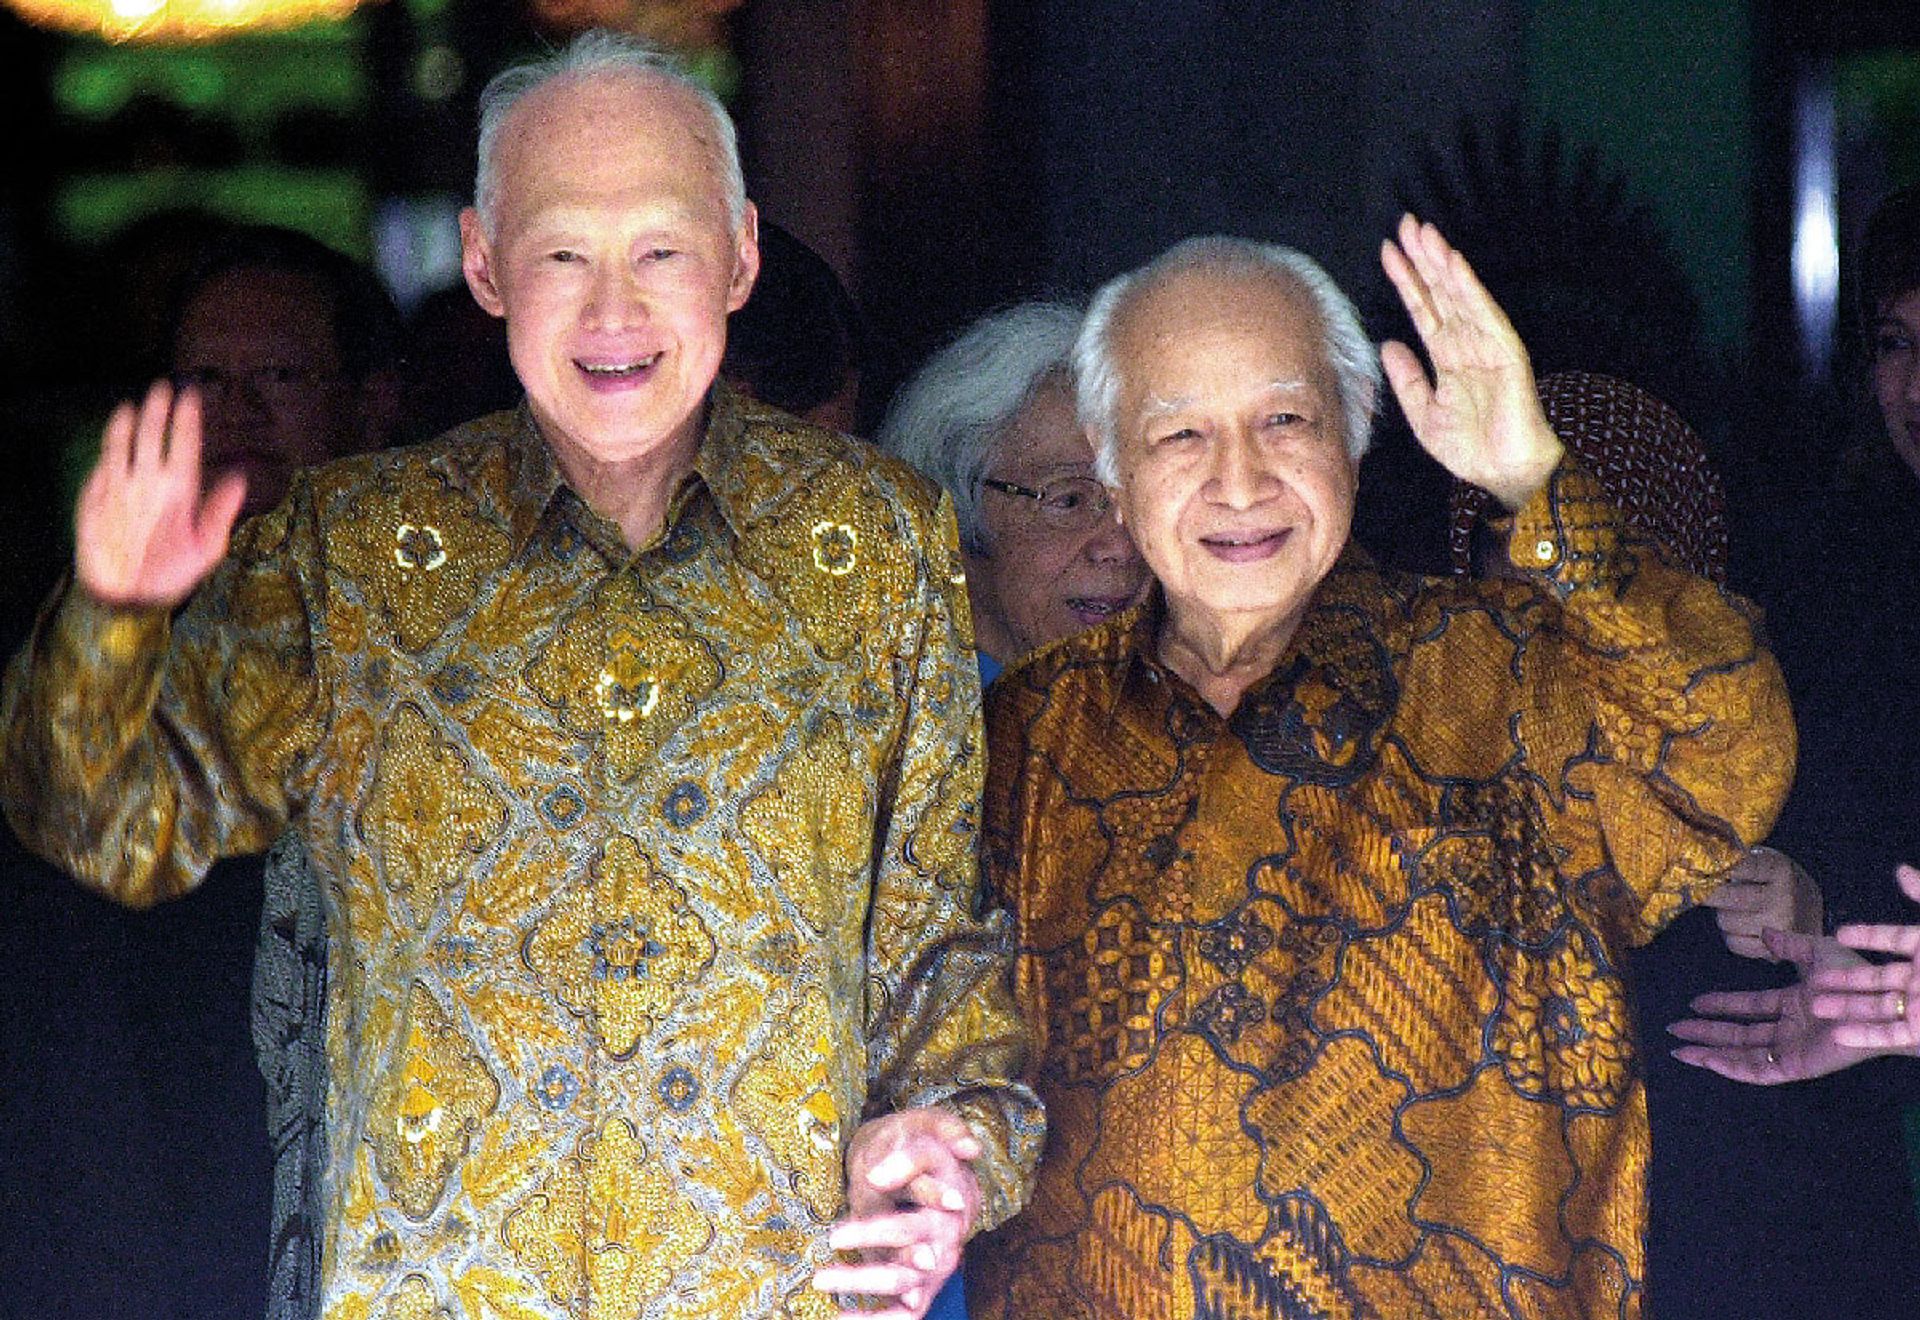 Mr Lee with former Indonesian president Suharto at his Jakarta residence on Feb 22, 2006. The two shared a close friendship spanning 40 years, and their annual “four-eye” meetings forged political stability between Singapore and Indonesia. Mr Lee was the first foreign leader to visit Mr Suharto in hospital before his death on Jan 27, 2008. Photo: Agence France-Presse